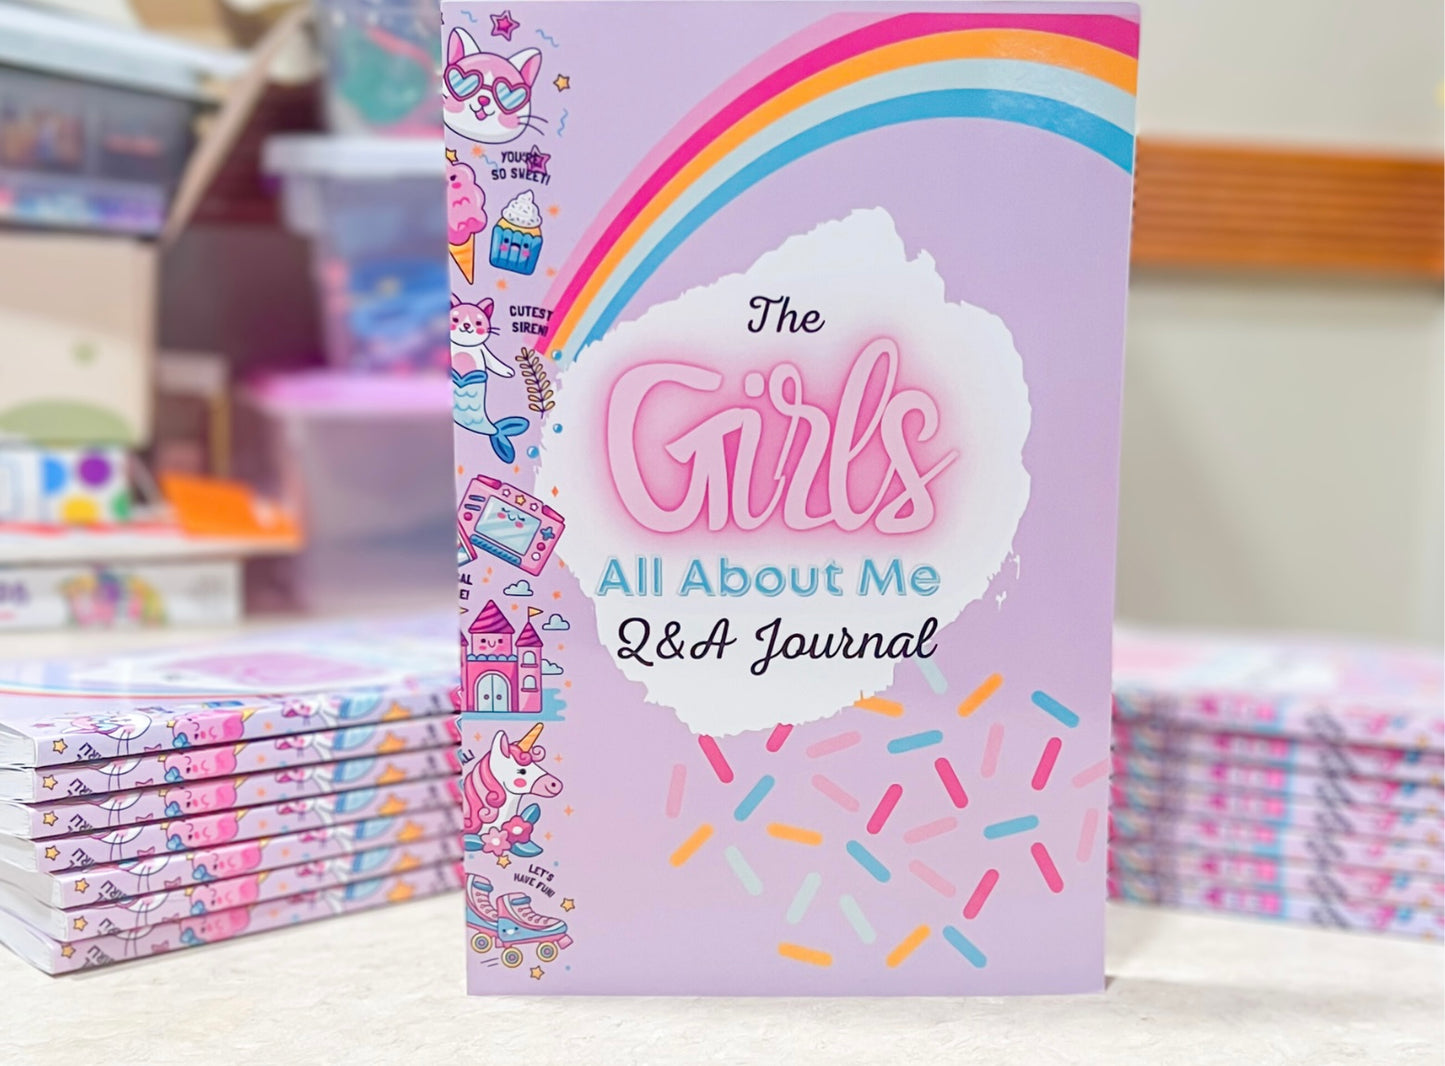 The Girls All About Me Q&A Journal